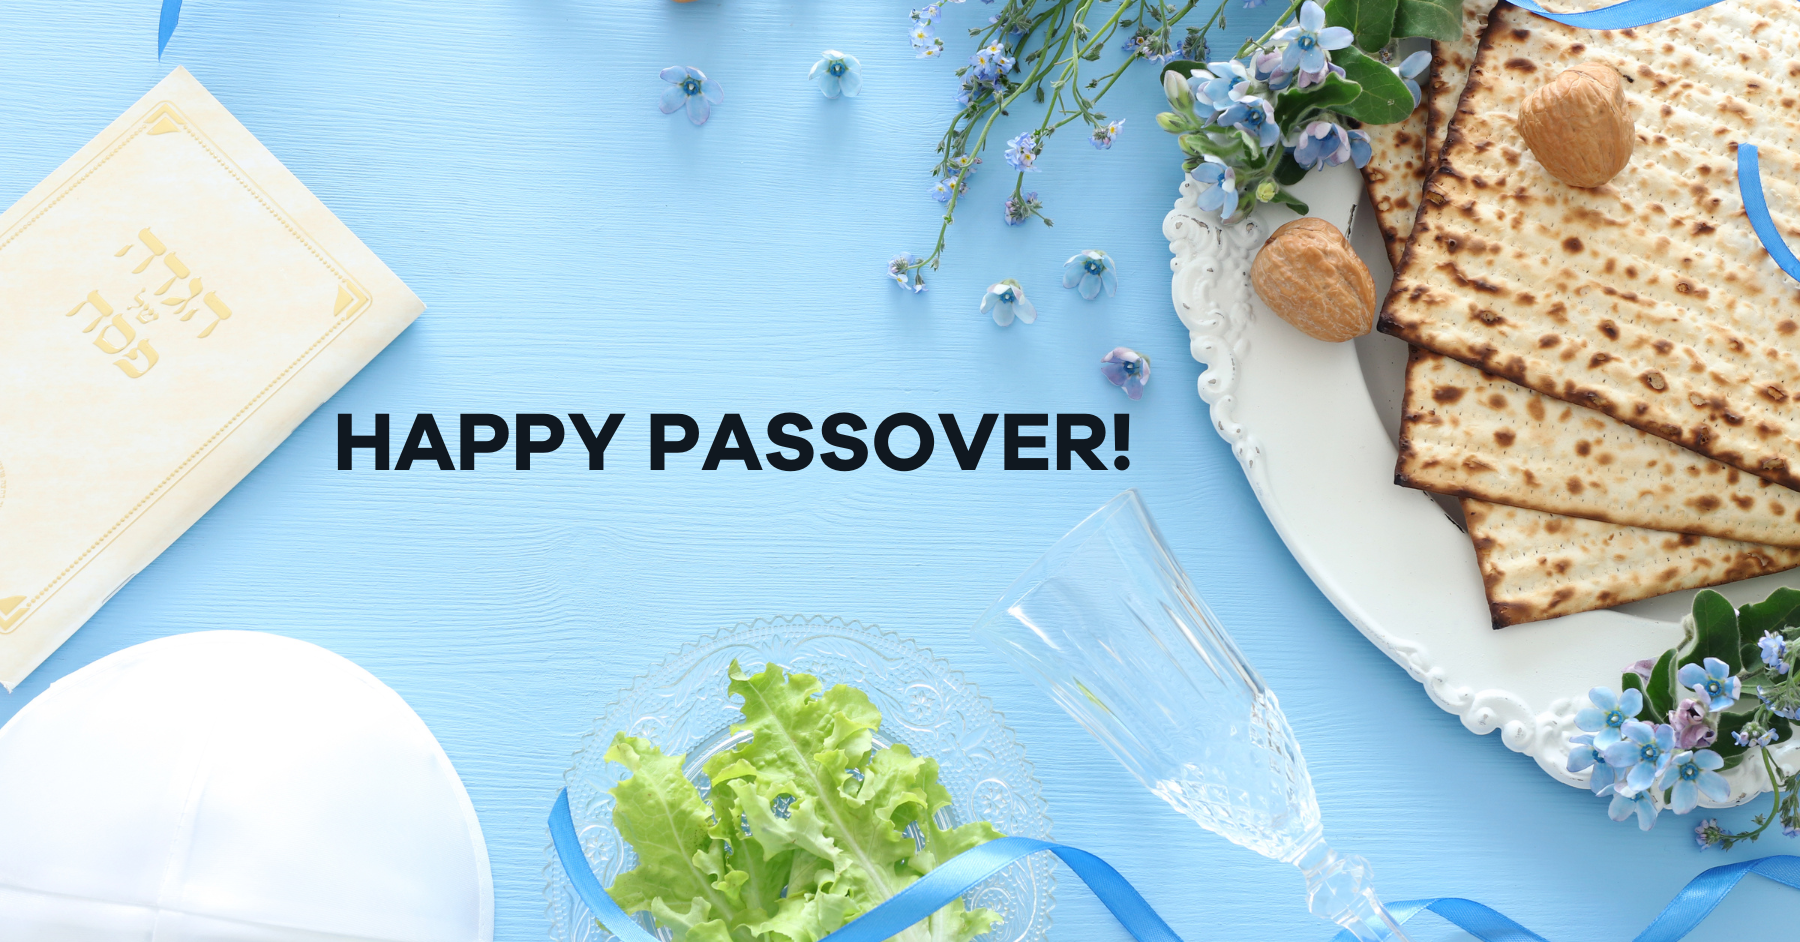 Passover: Exploring the History and Meaning Behind the Holiday